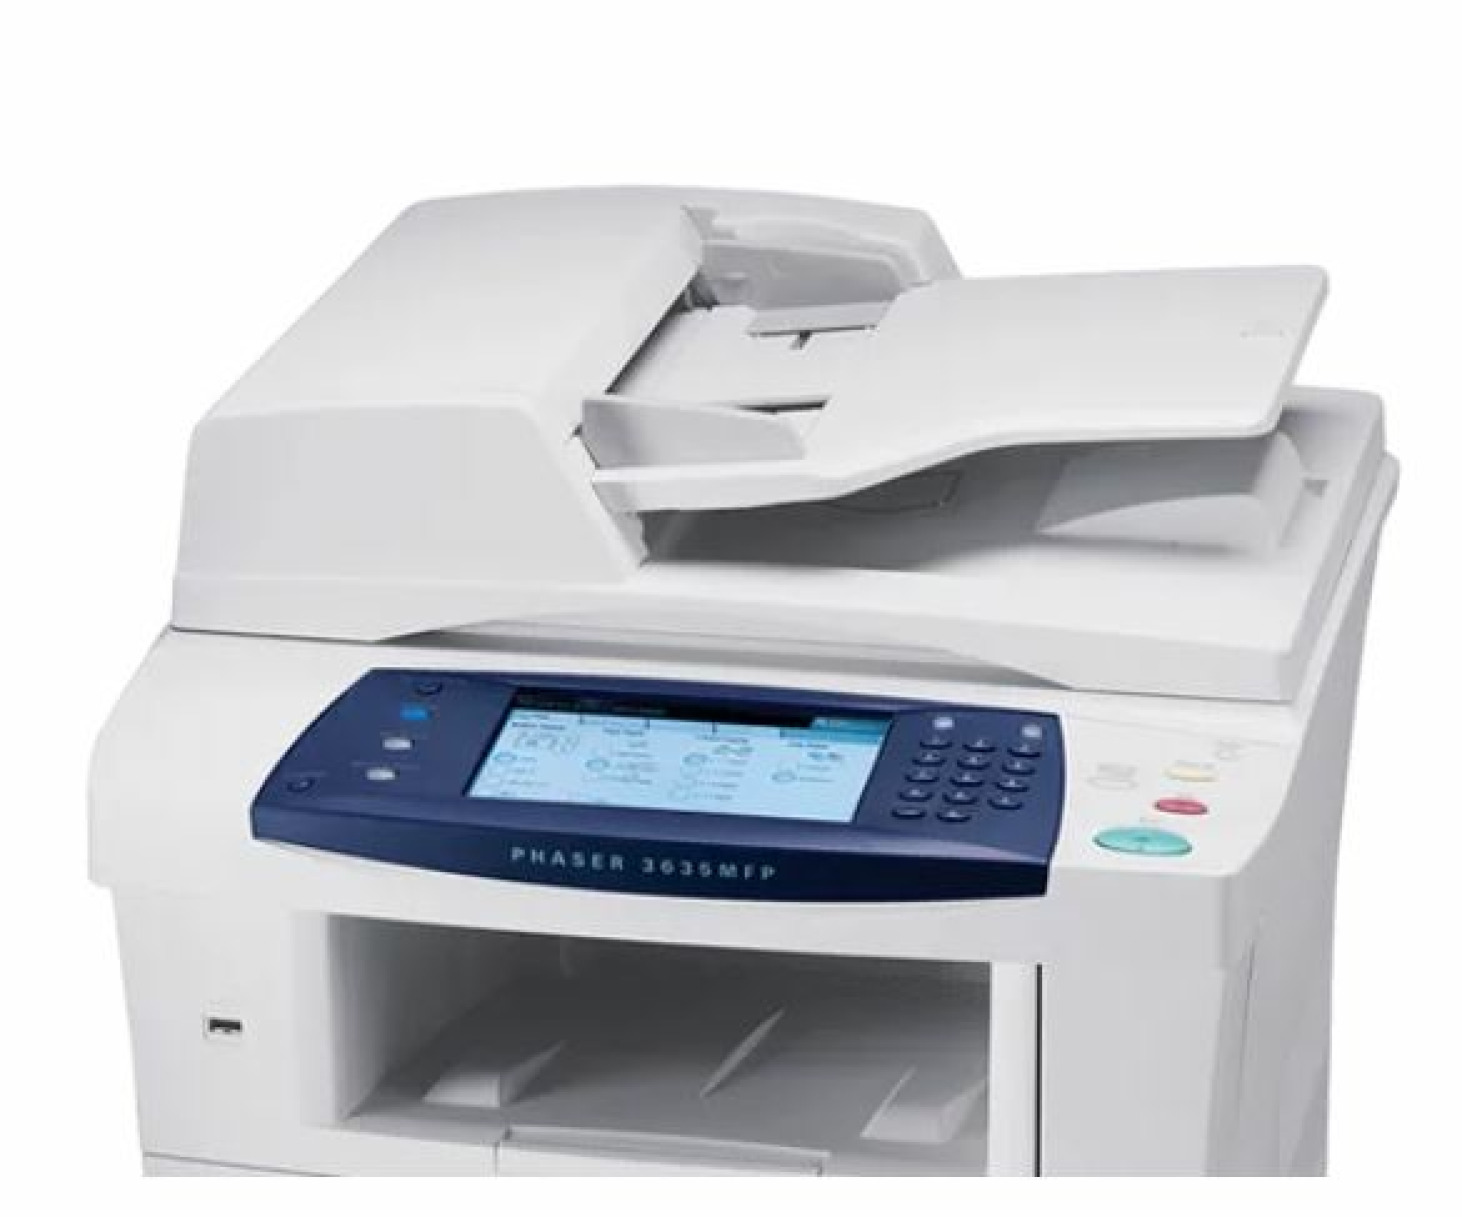 All in one Printer Xerox Phaser 3635 MFP Open Box Ethernet Rj-11 Usb &lt;10K Pages A4 A5 B/W Laser-Printer Unlocked 7&quot;